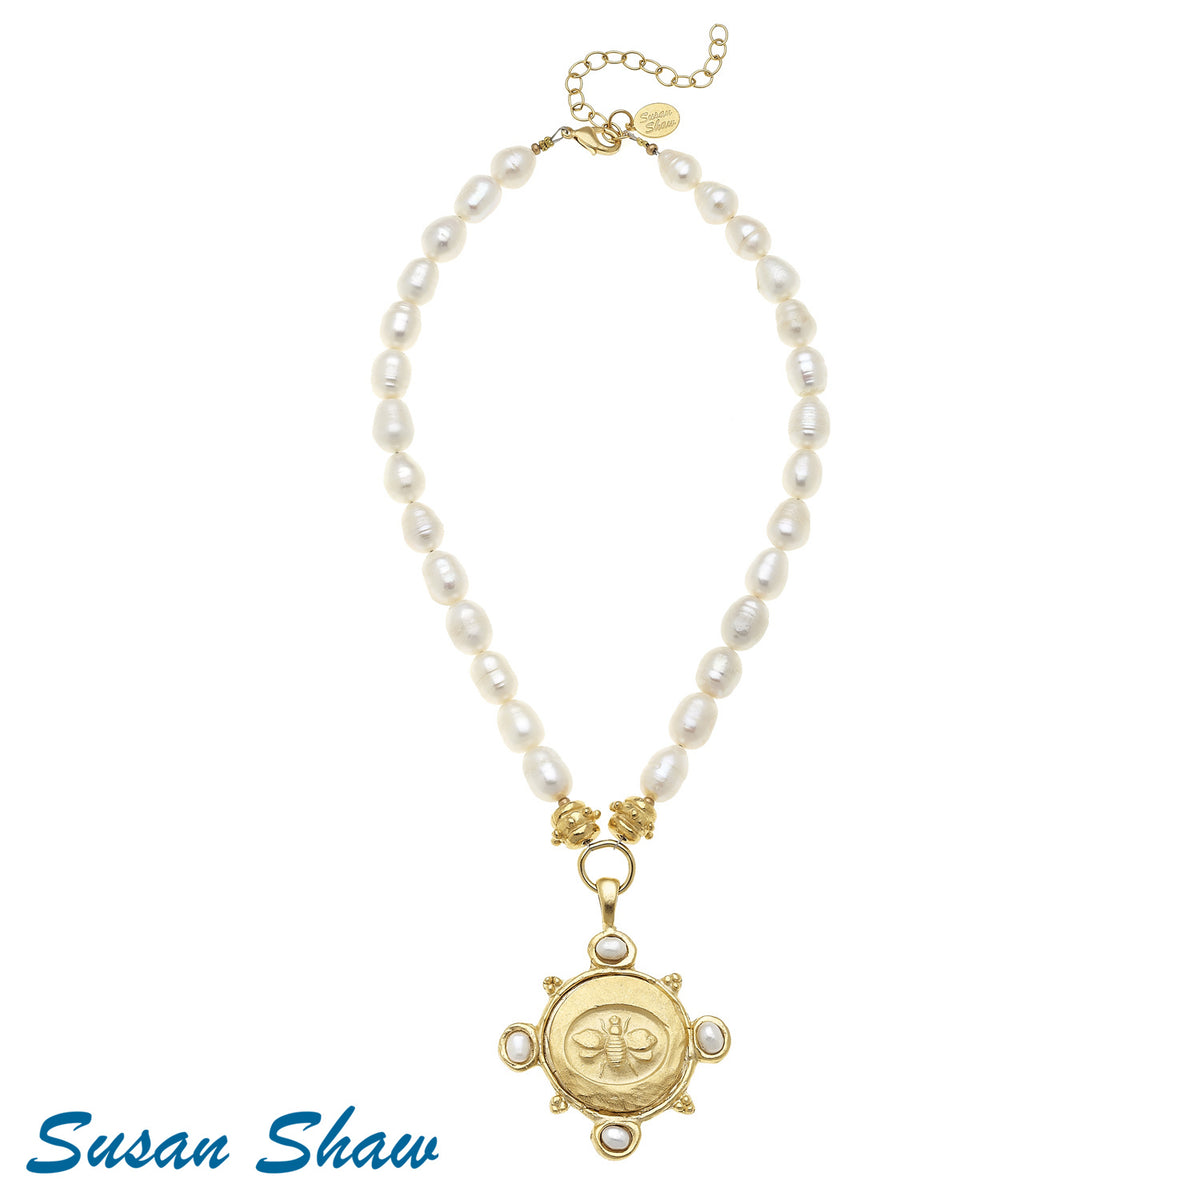 SUSAN SHAW Handcast Gold Bee & Freshwater Pearls on Genuine Freshwater Pearl Necklace